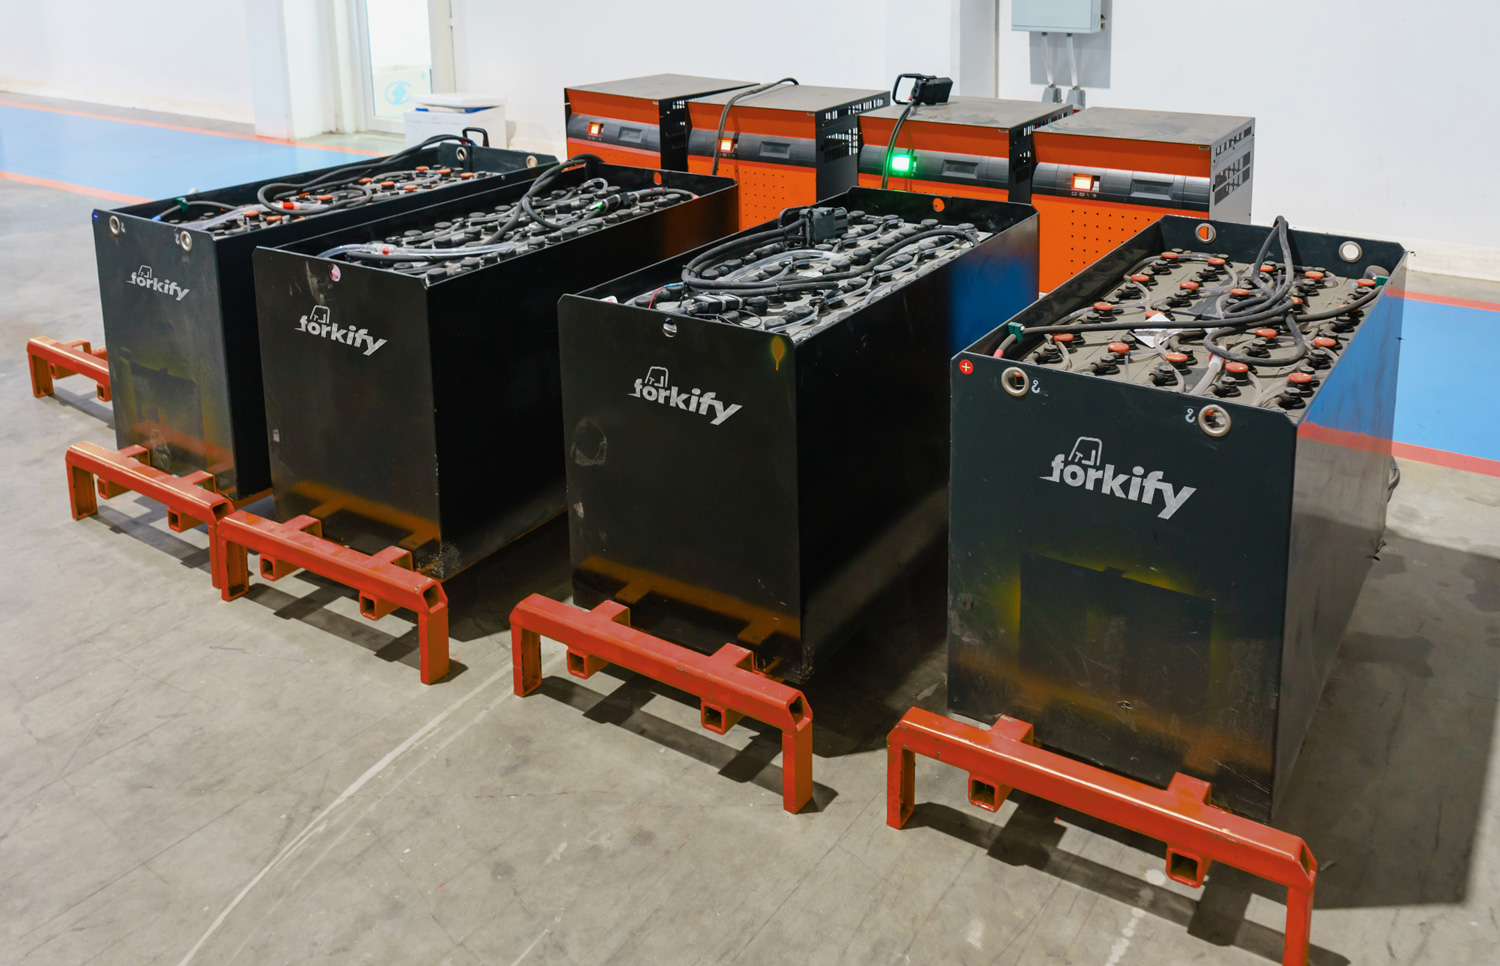 A Comprehensive Guide to Forklift Battery Types